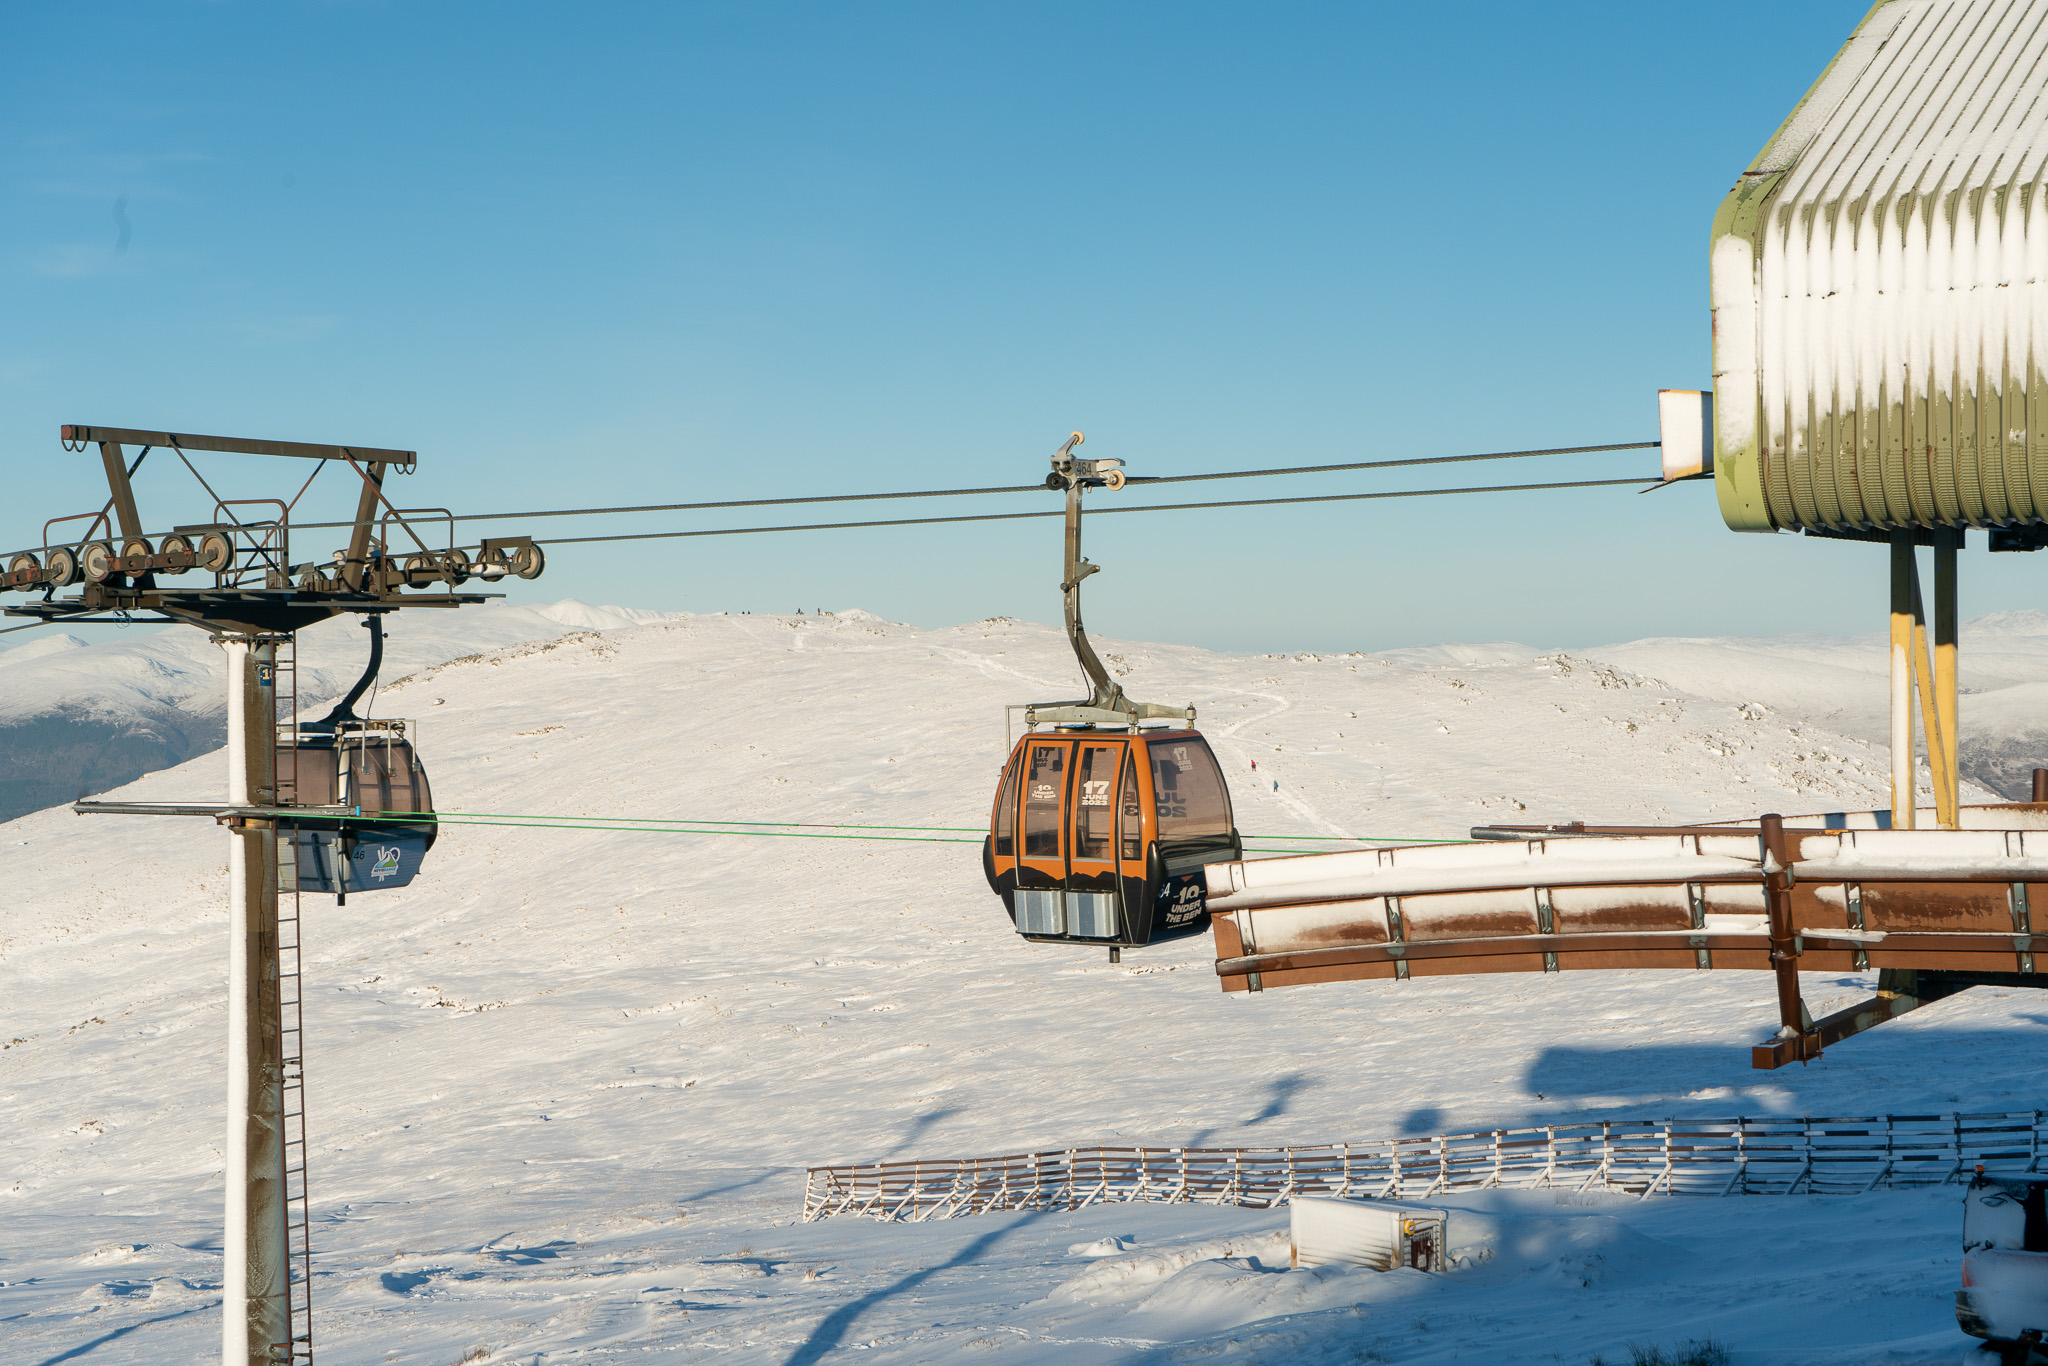 Highlands mountain resort reaches new heights with £1m loan